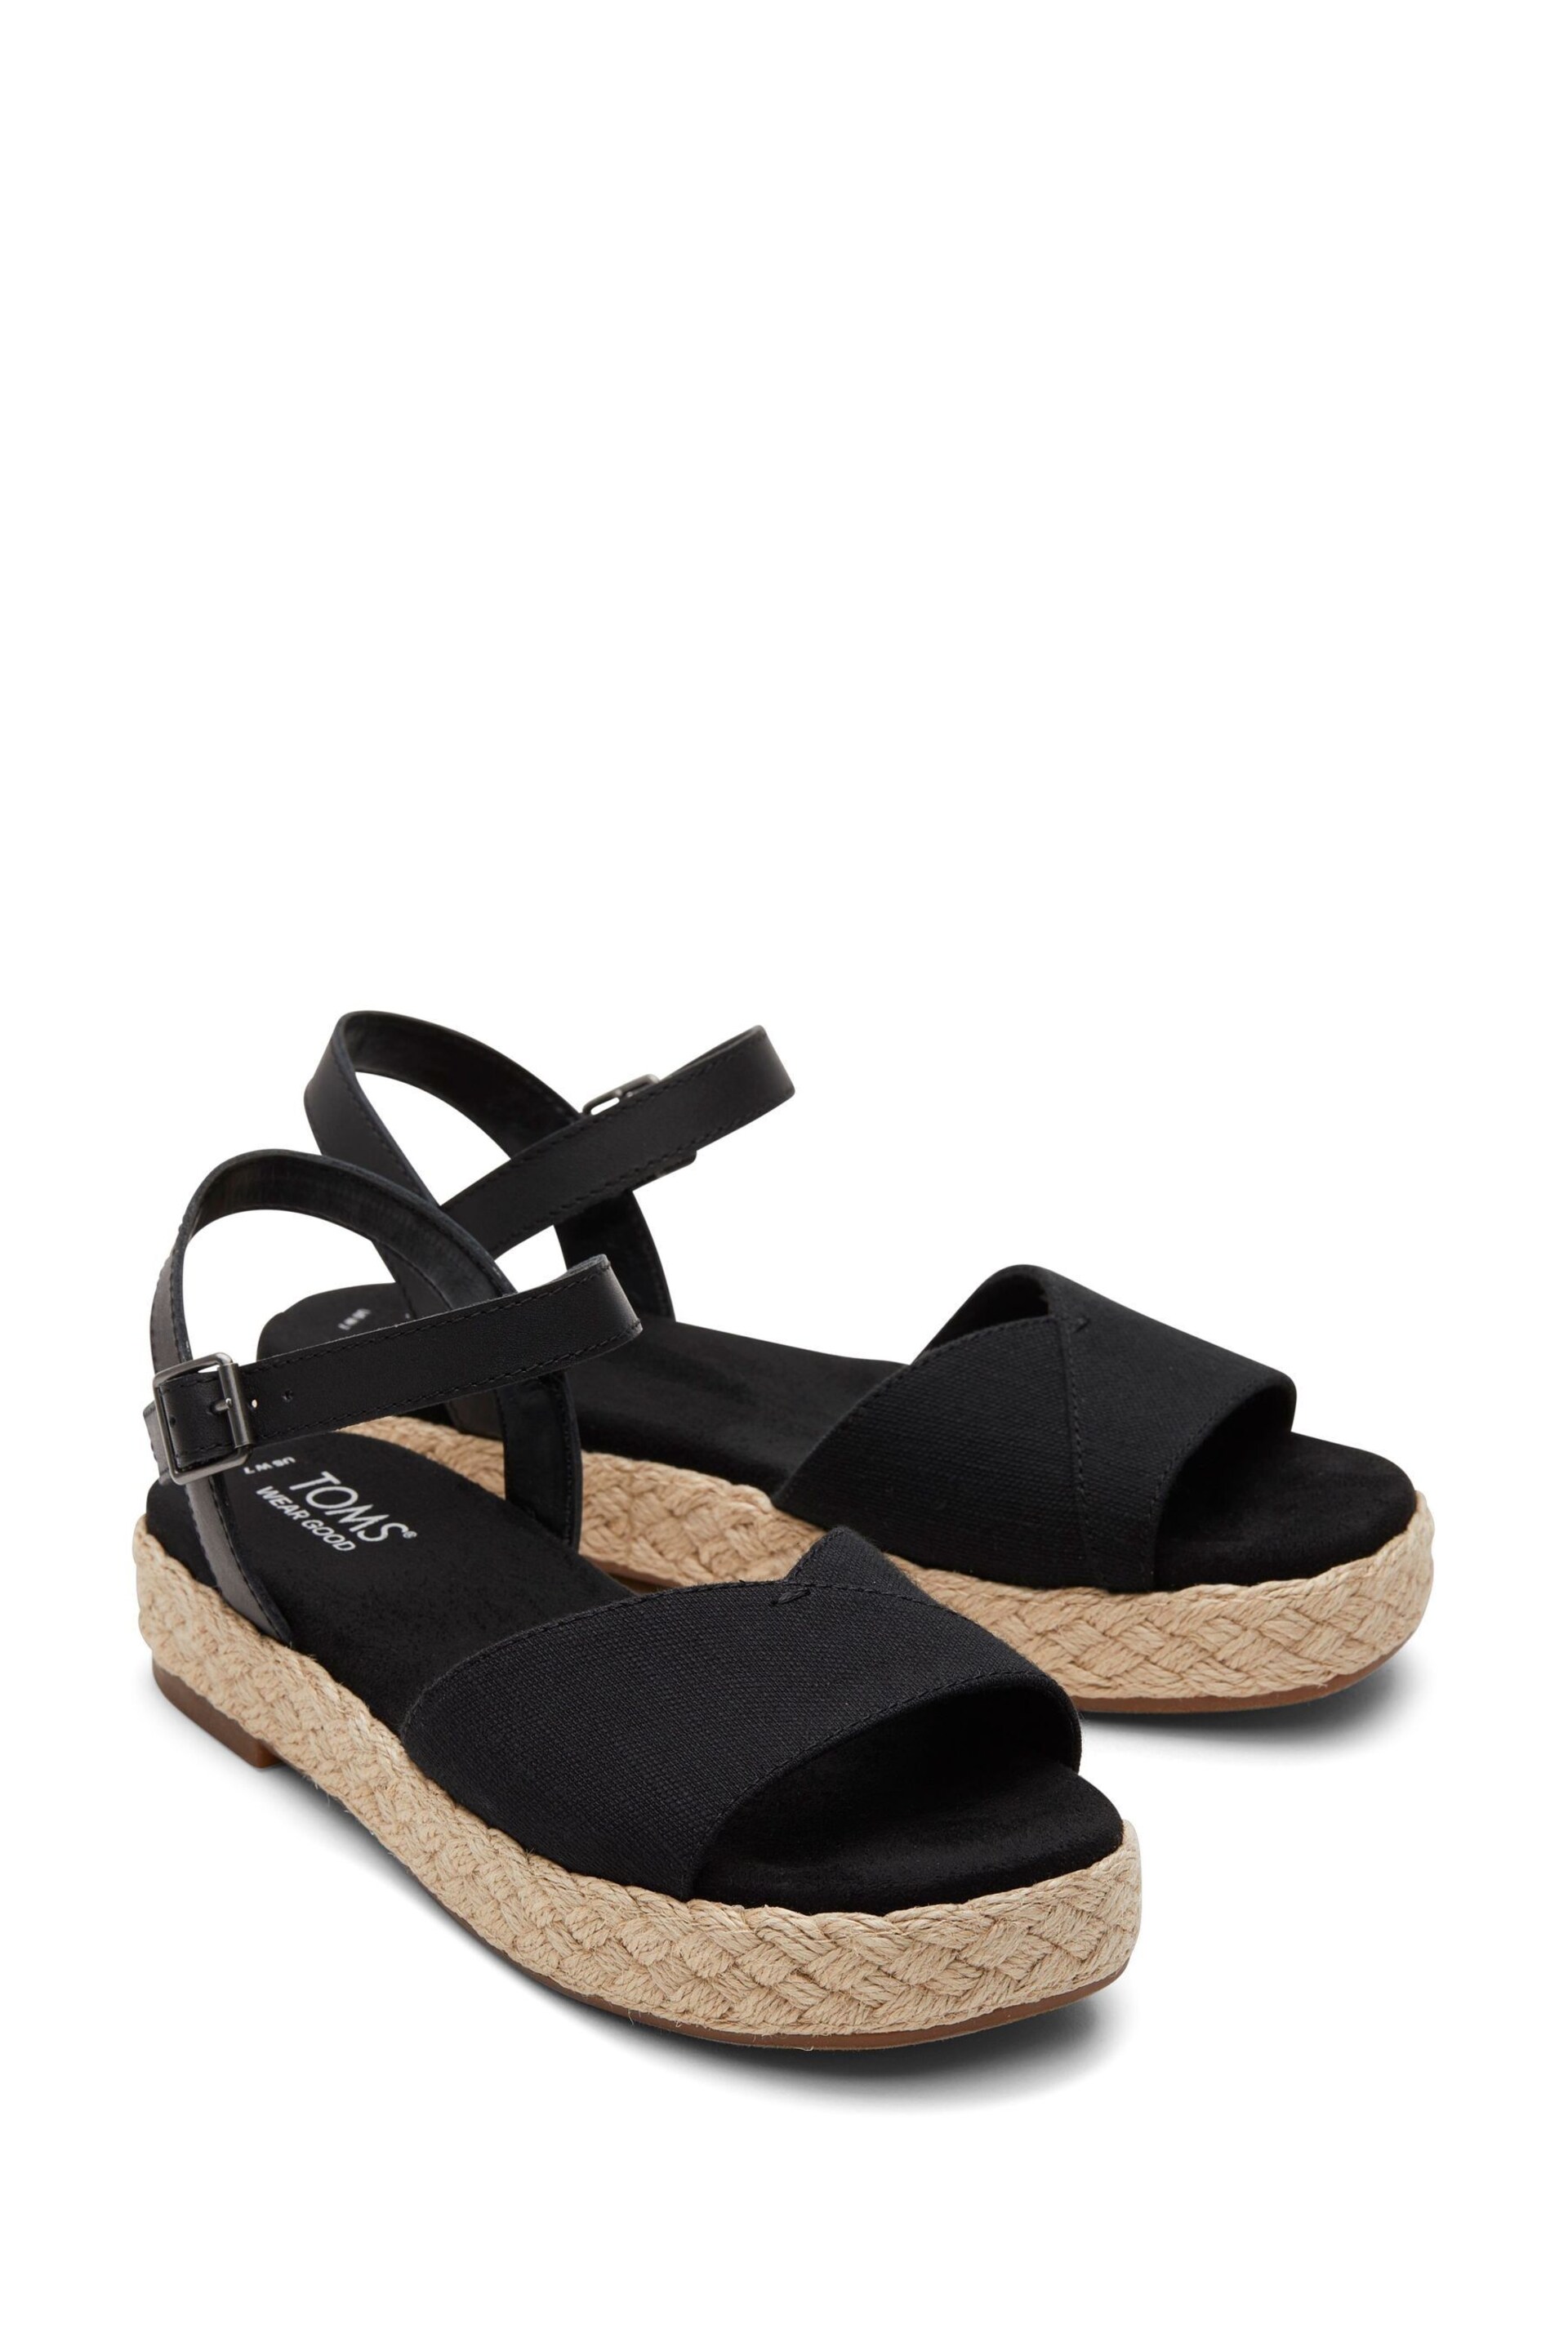 TOMS Abby Black Sandals In  Woven - Image 3 of 6